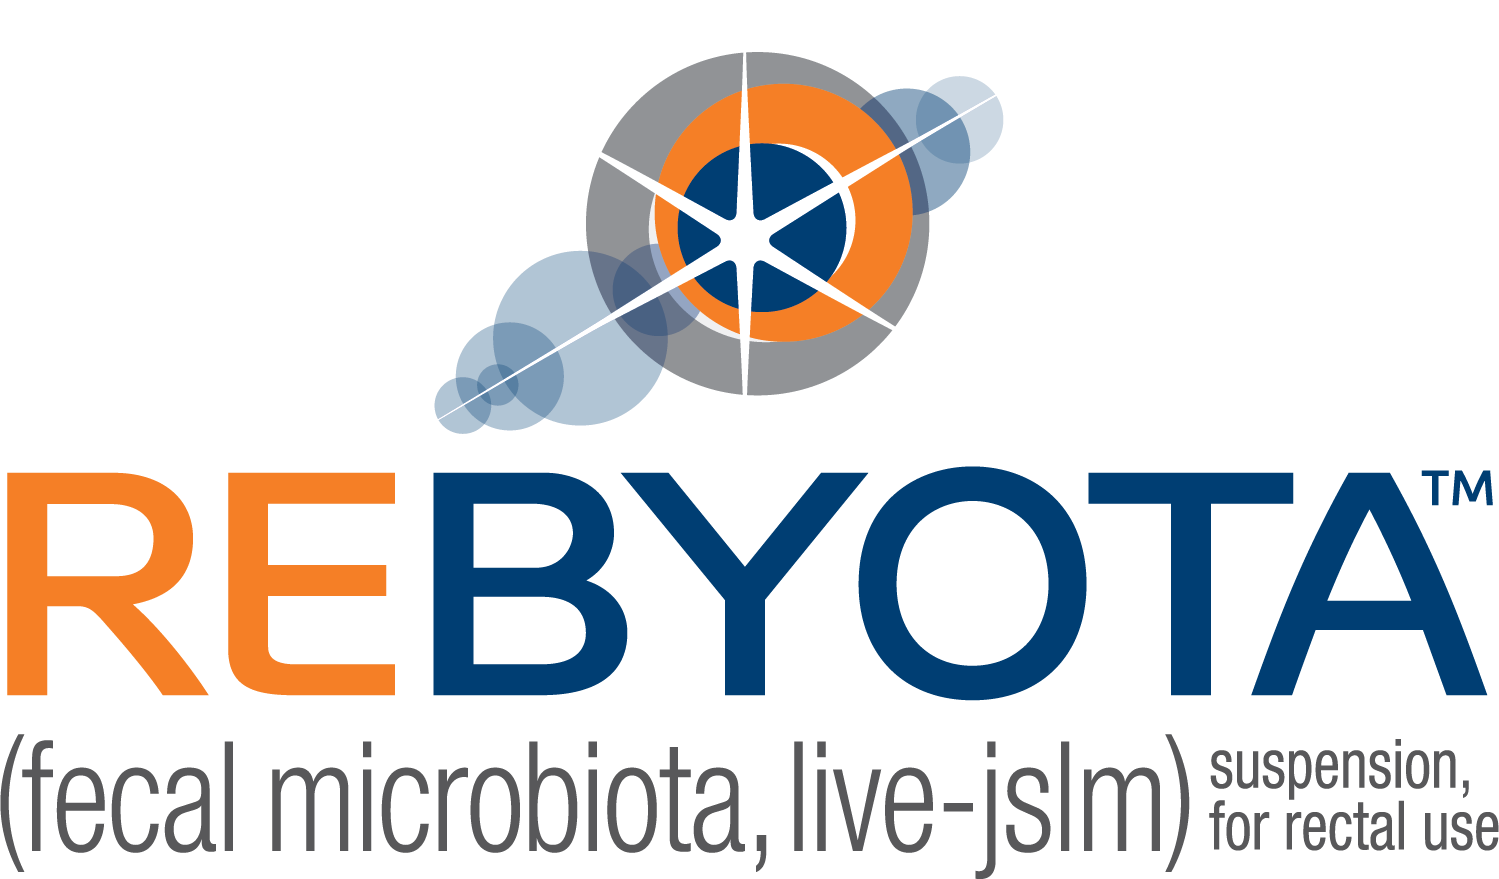 Rebyota Demonstrates Safety and Efficacy Against rCDI, Including in High-Risk Patients